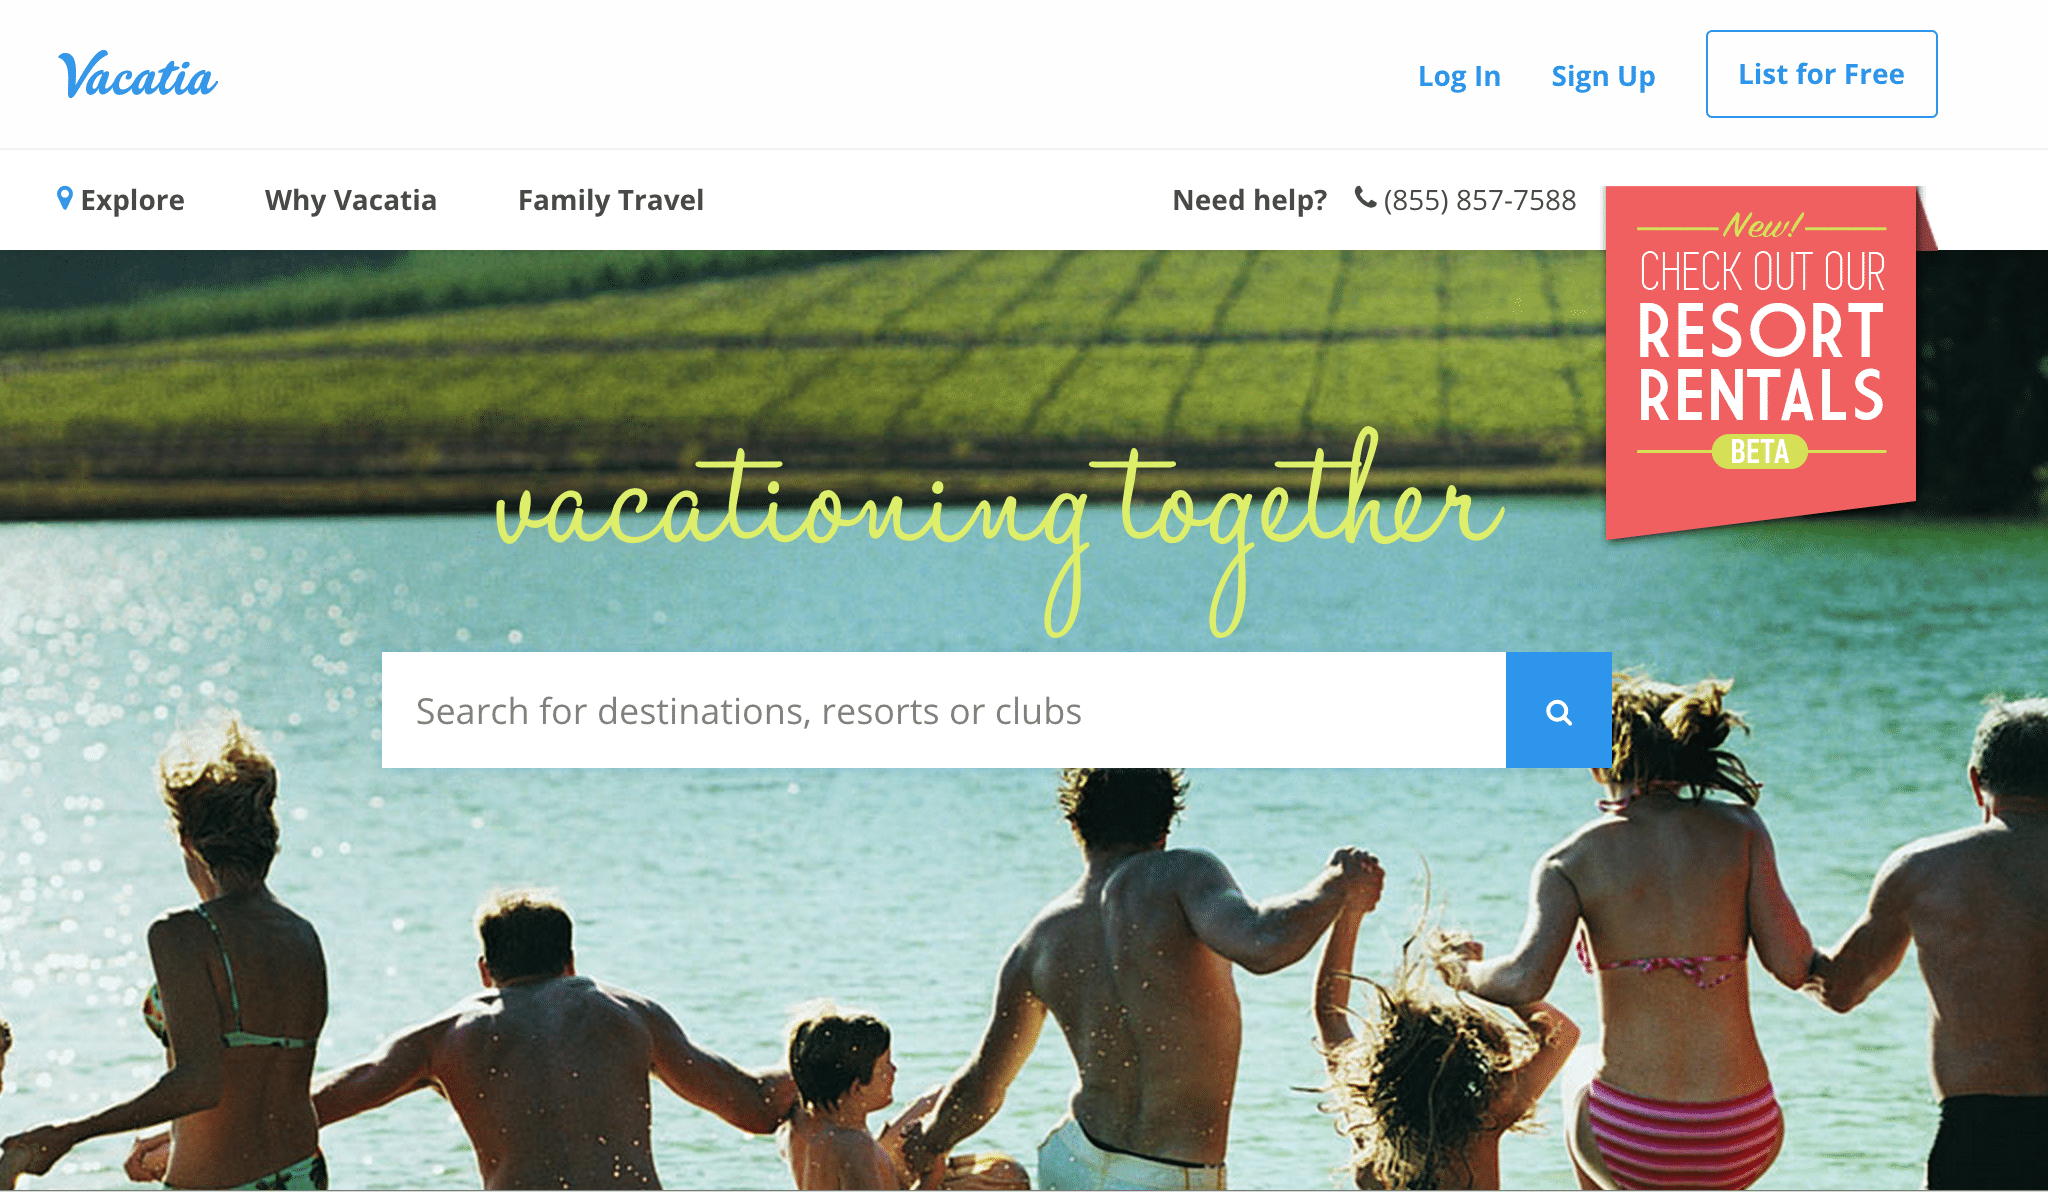 Vacatia is a marketplace for timeshares and fractional-ownership properties.